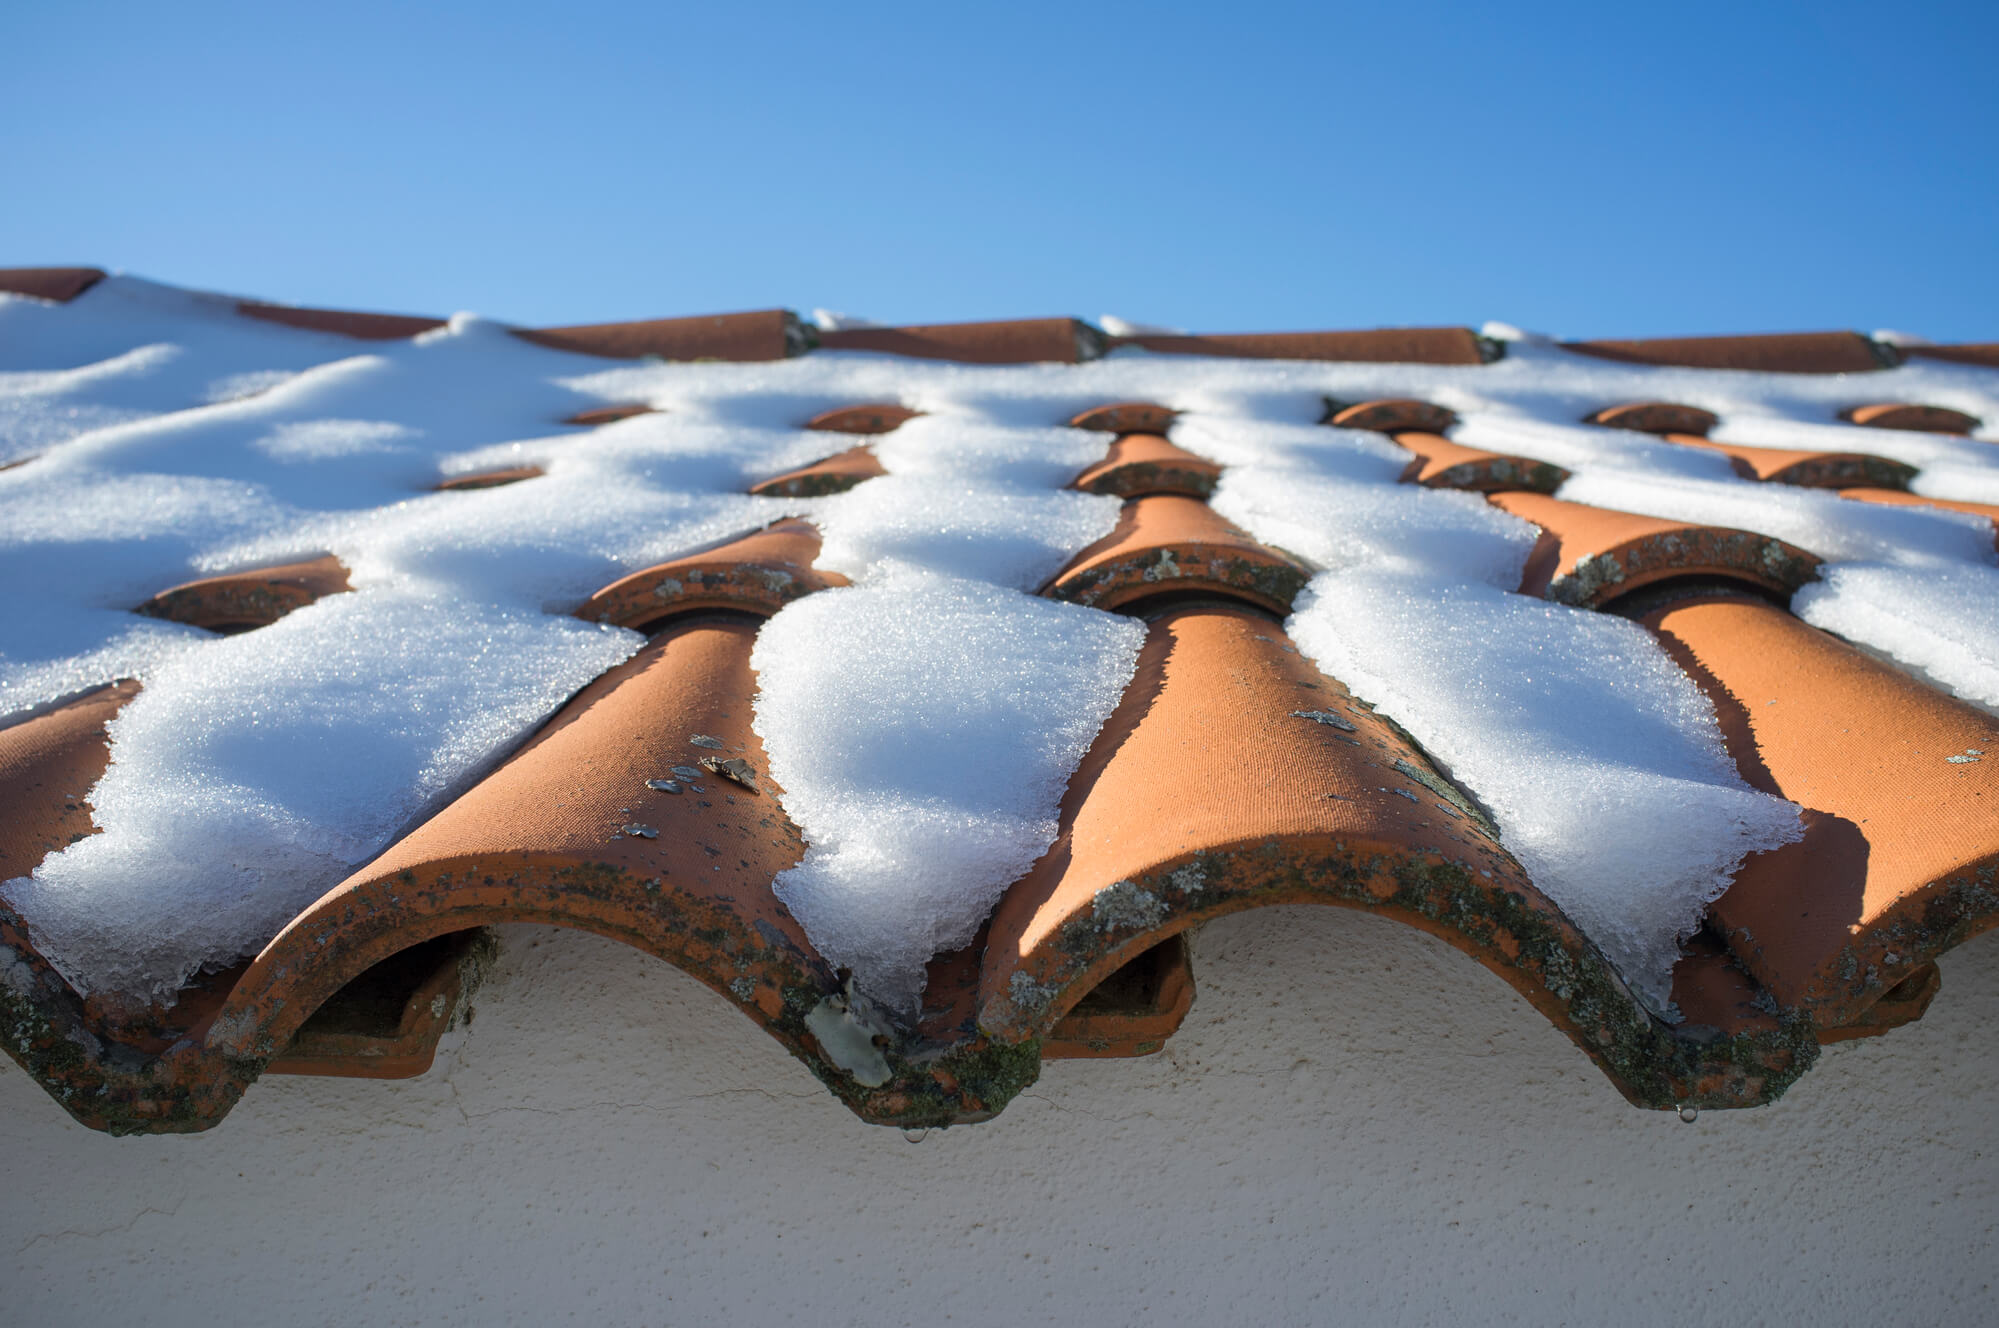 commercial roofing in texas with ice dams